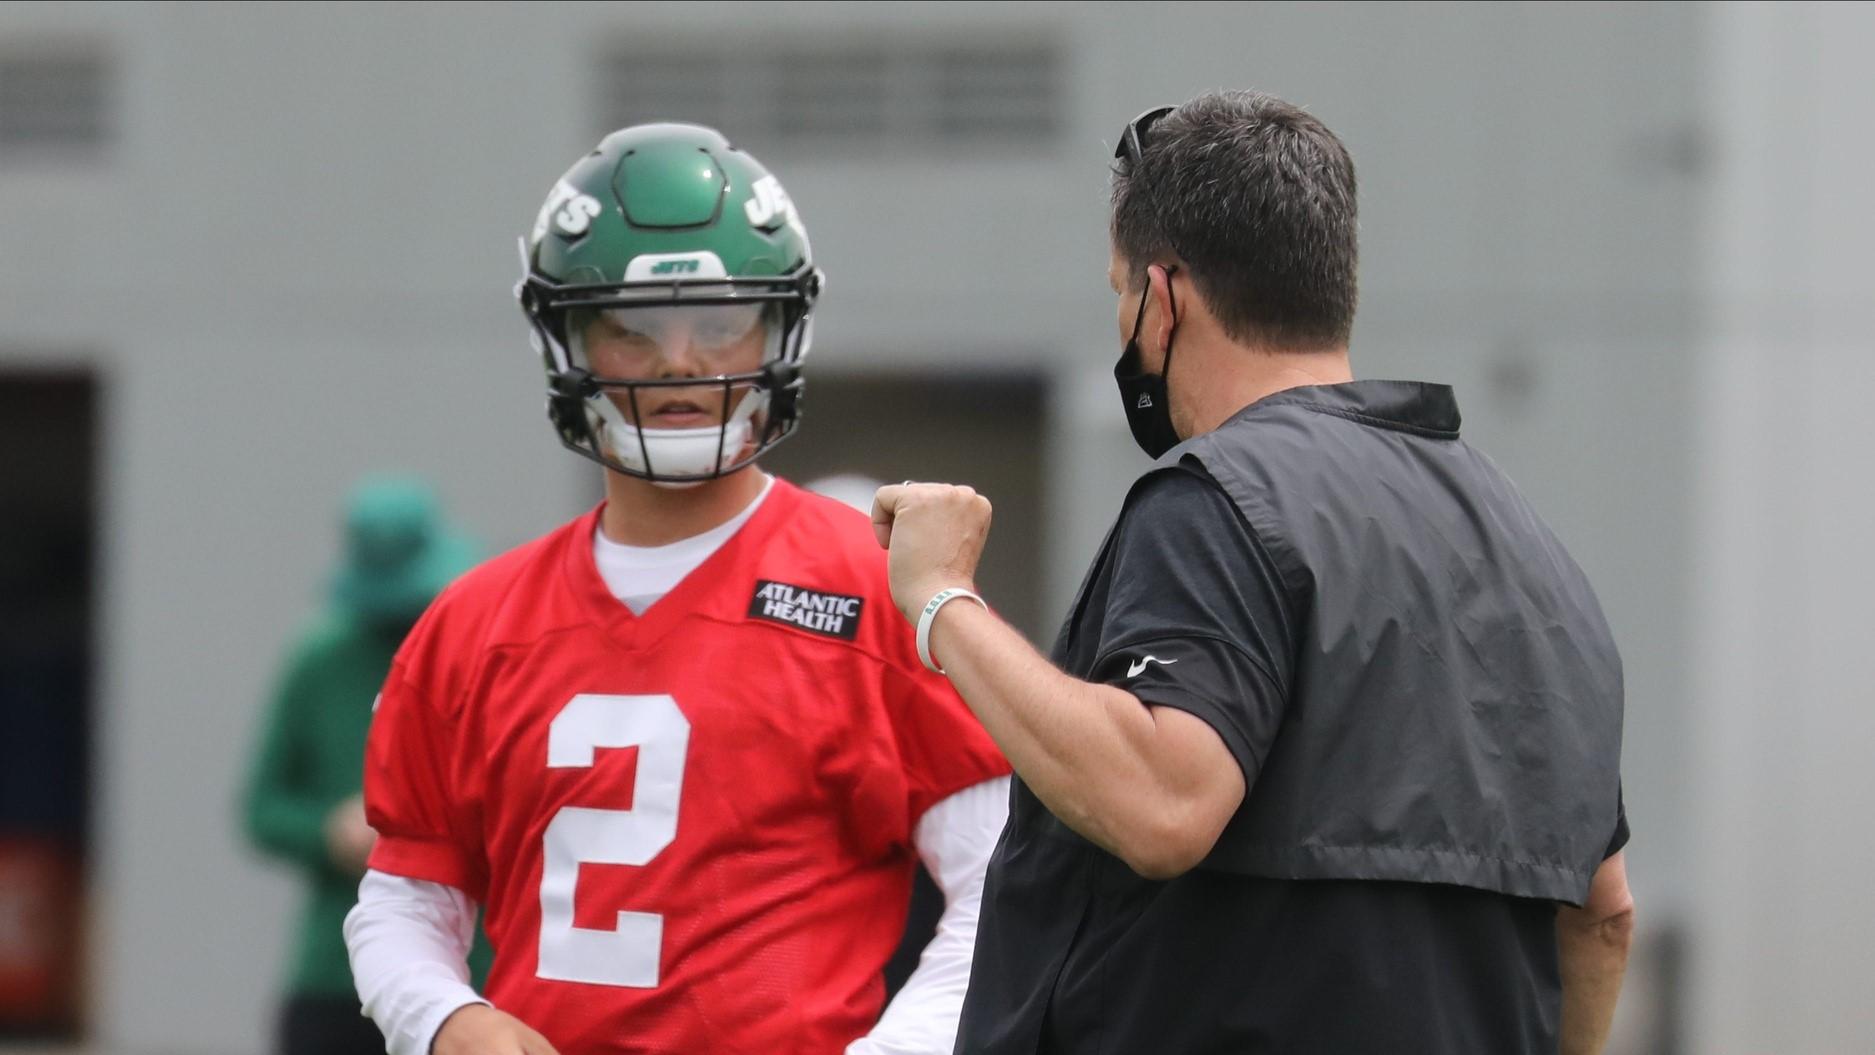 The new Jets quarterback Zach Wilson with Greg Knapp, passing game specialist at the NY Jets rookie mini camp in Florham Park, NJ on May 7, 2021. / Chris Pedota, NorthJersey.com